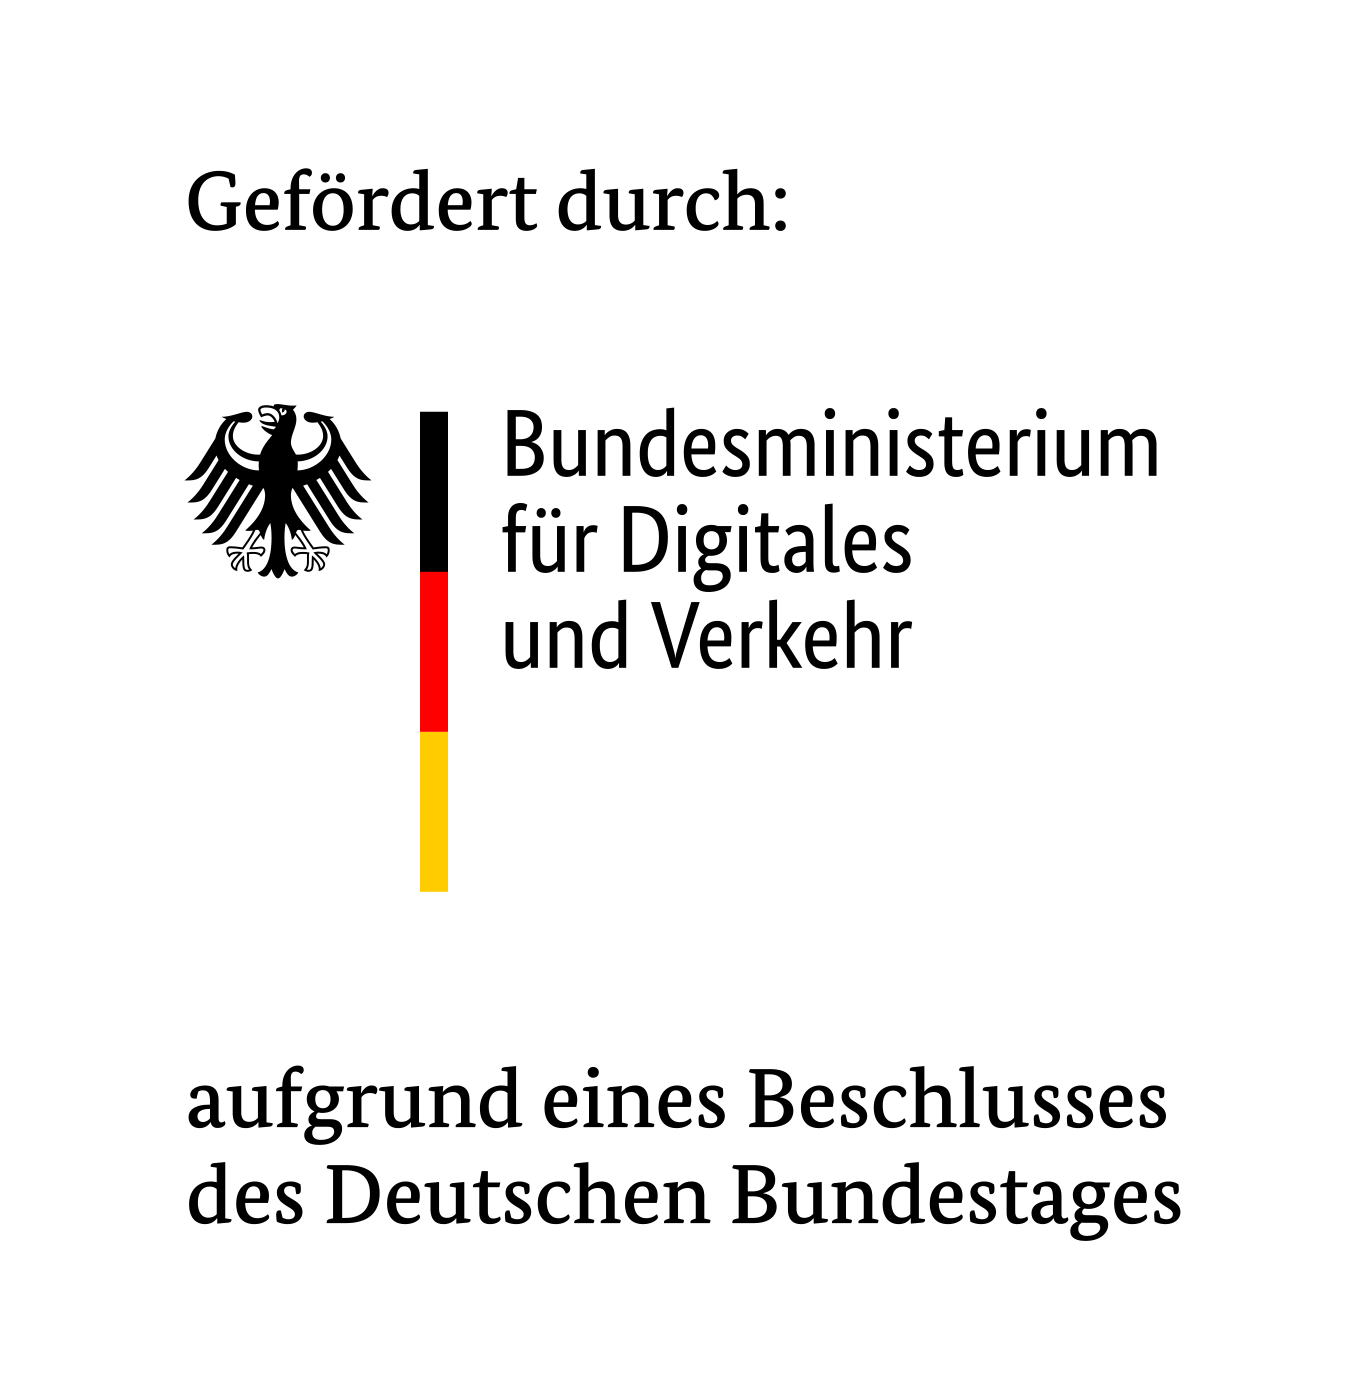 Logo of the German Federal Ministry of Digital Affairs and Transport